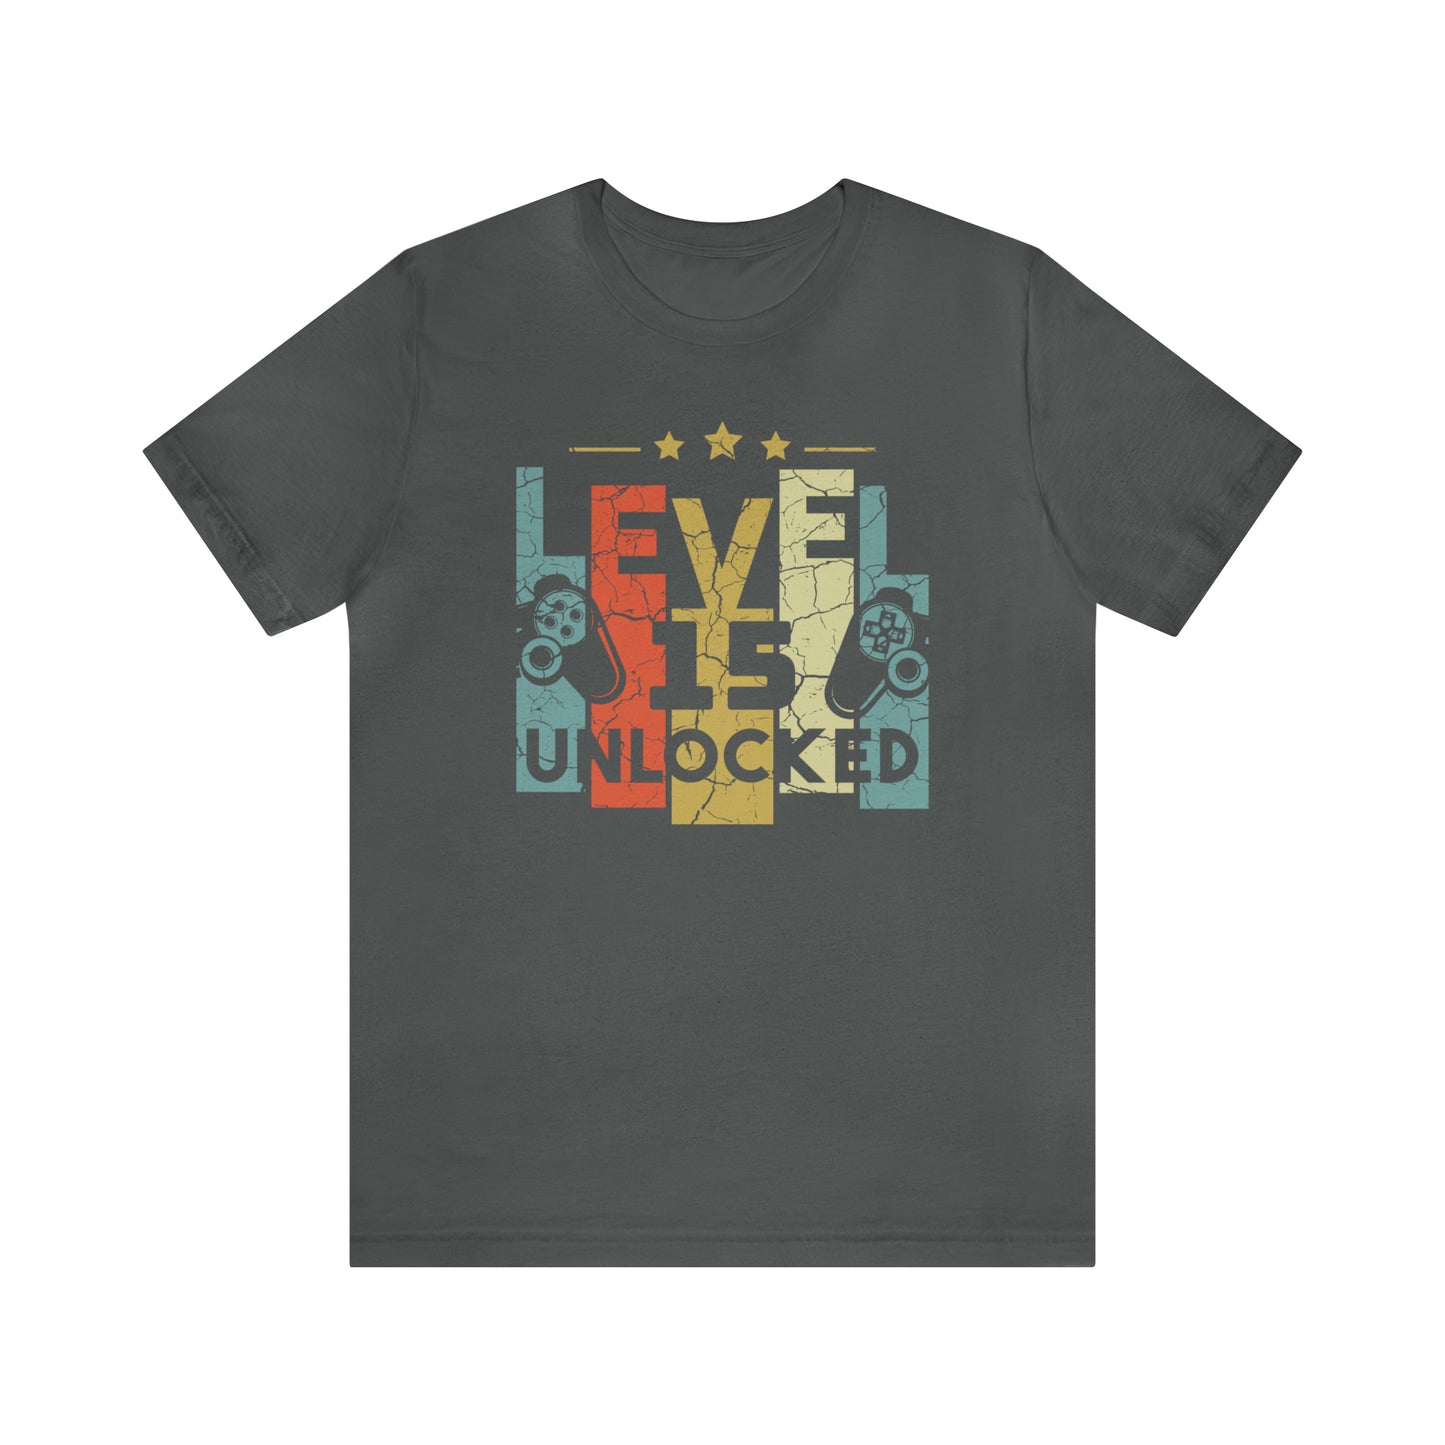 15th Birthday gift for Son or Daughter, Level 15 Unlocked Shirt for Nephew or Niece